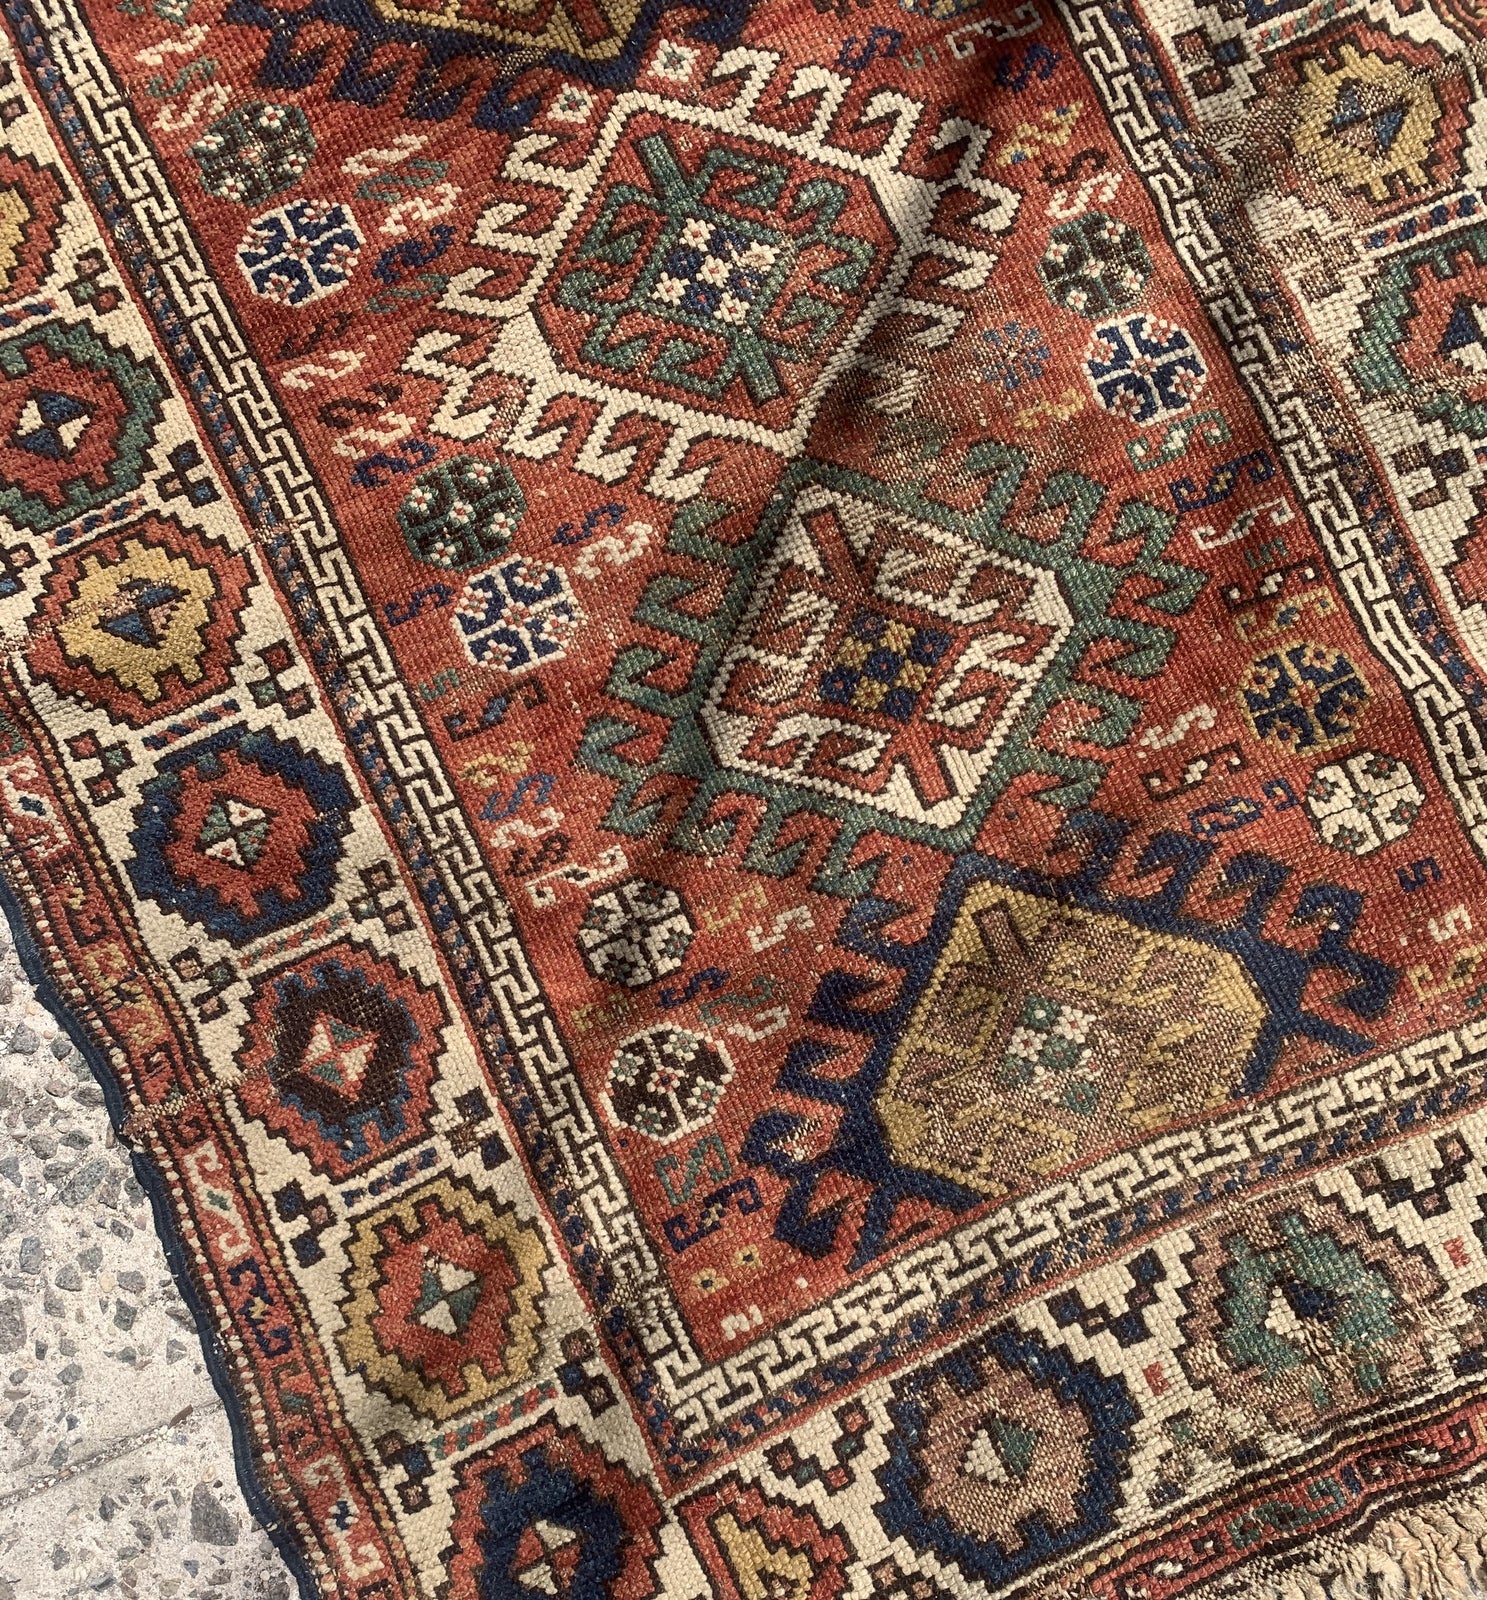 Handmade antique Caucasian Kazak rug in red color. The rug is from the end of 19th century in distressed condition.